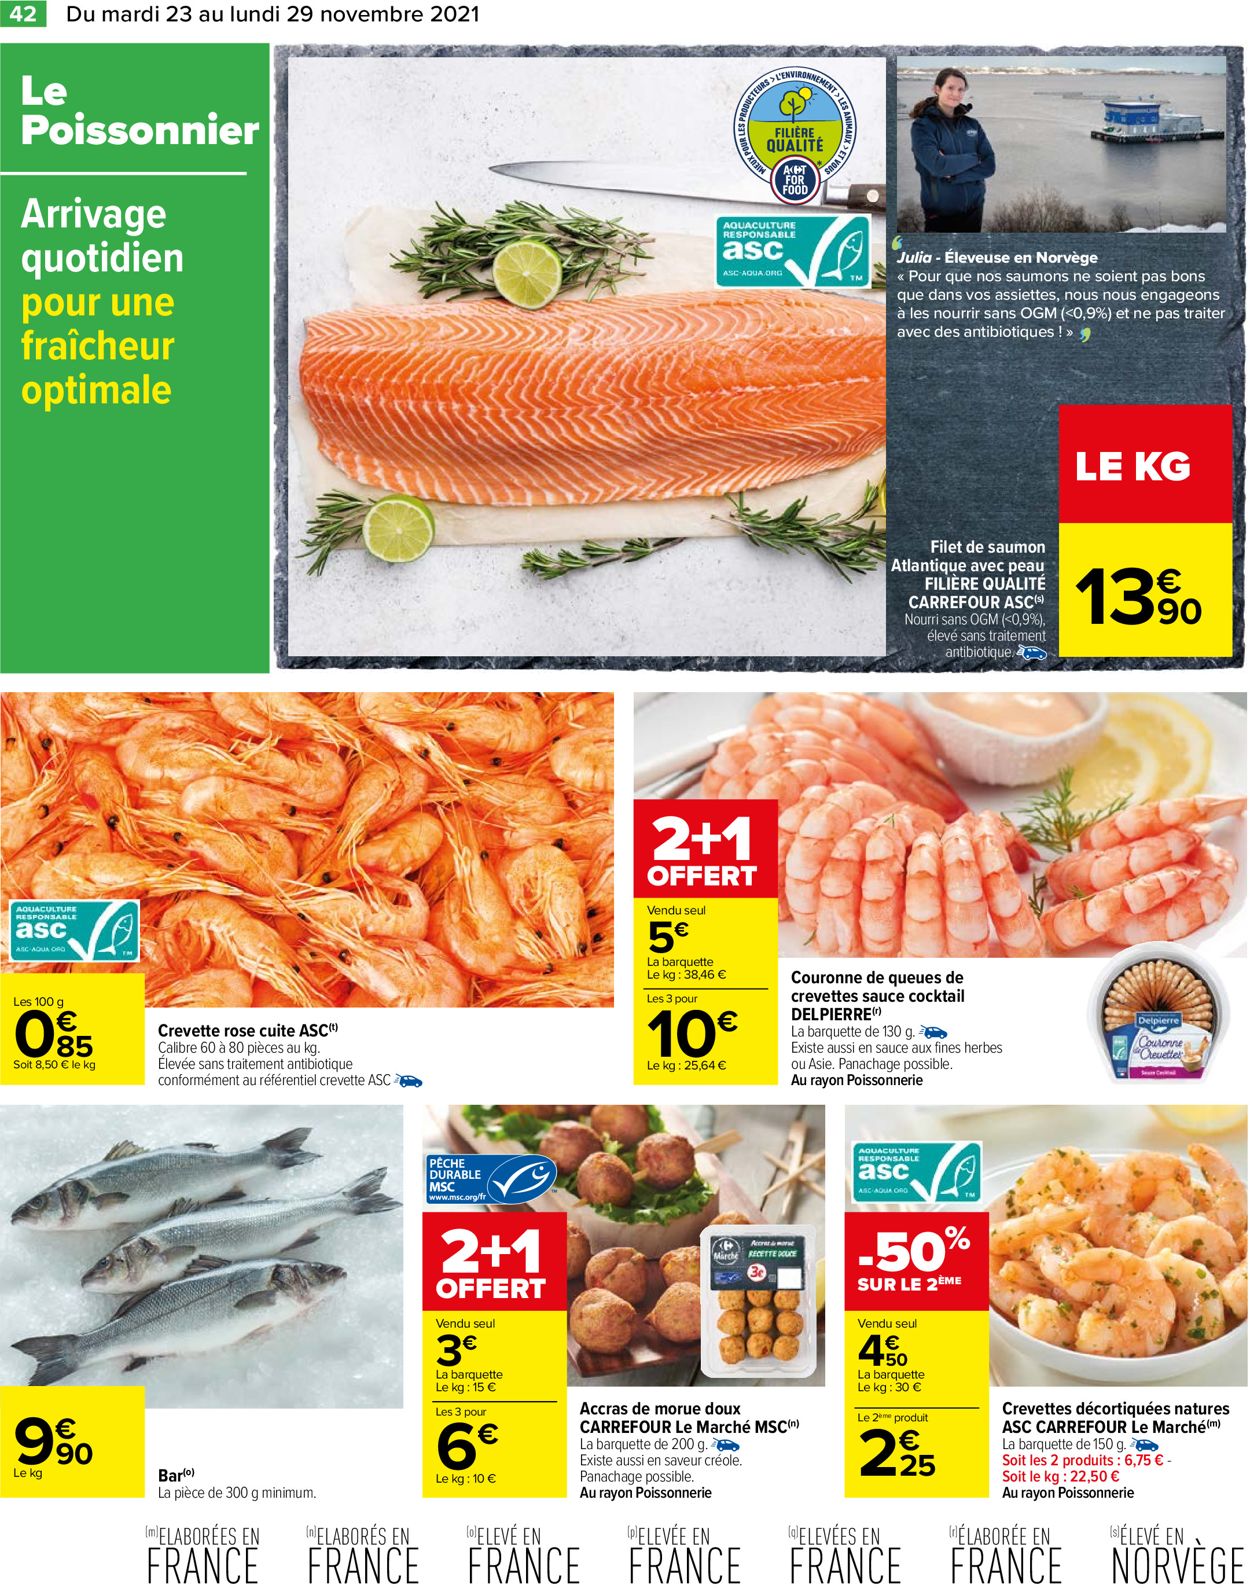 Carrefour BLACK WEEK 2021 Catalogue - 23.11-29.11.2021 (Page 42)